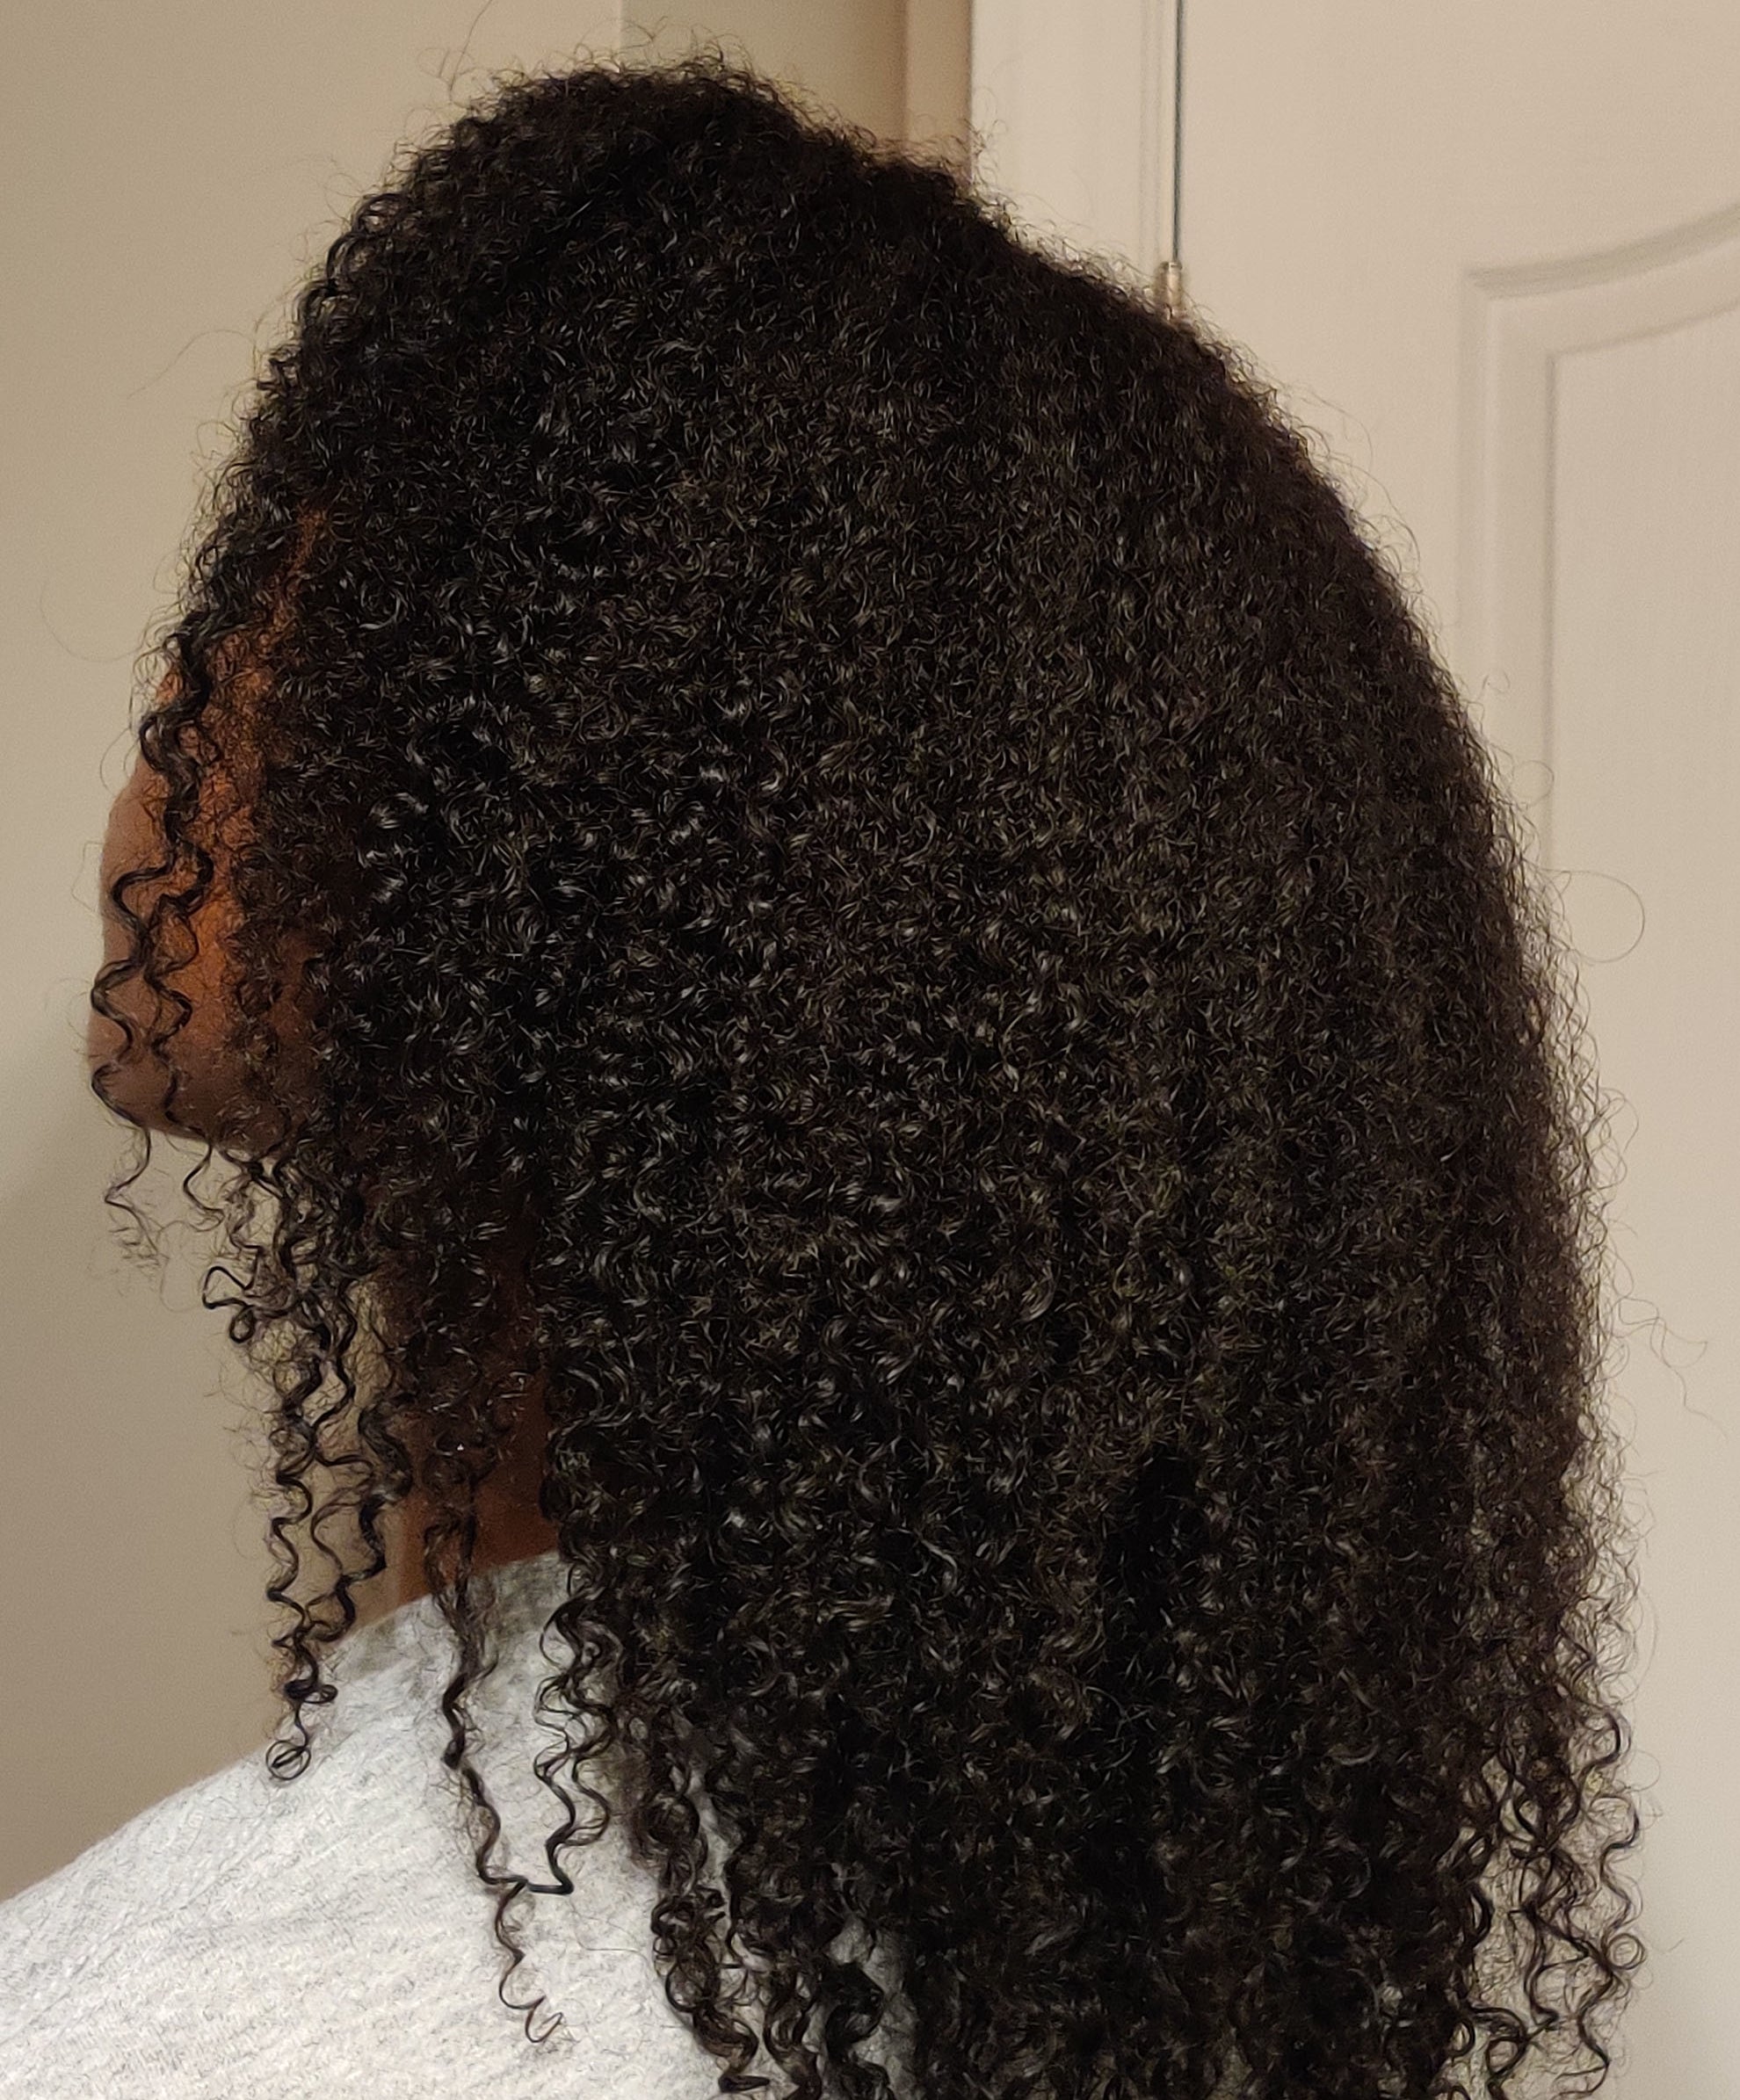 Side profile of a person with shoulder-length curly hair